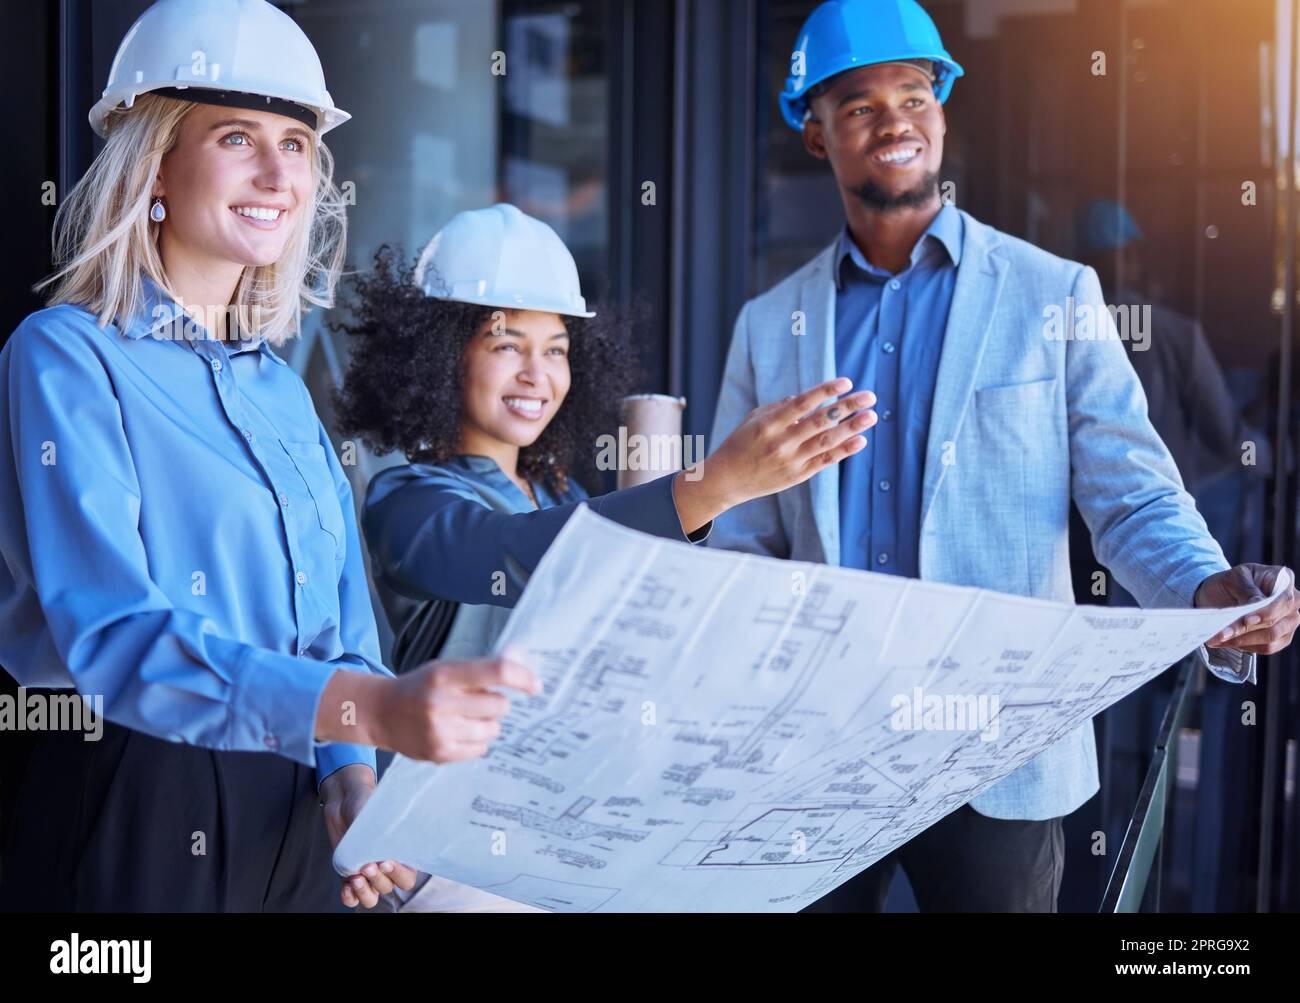 Diversity, team and creative architect people working on a site plan with blueprint for construction or building. Business contractors in teamwork, planning and strategy with paper design layout. Stock Photo